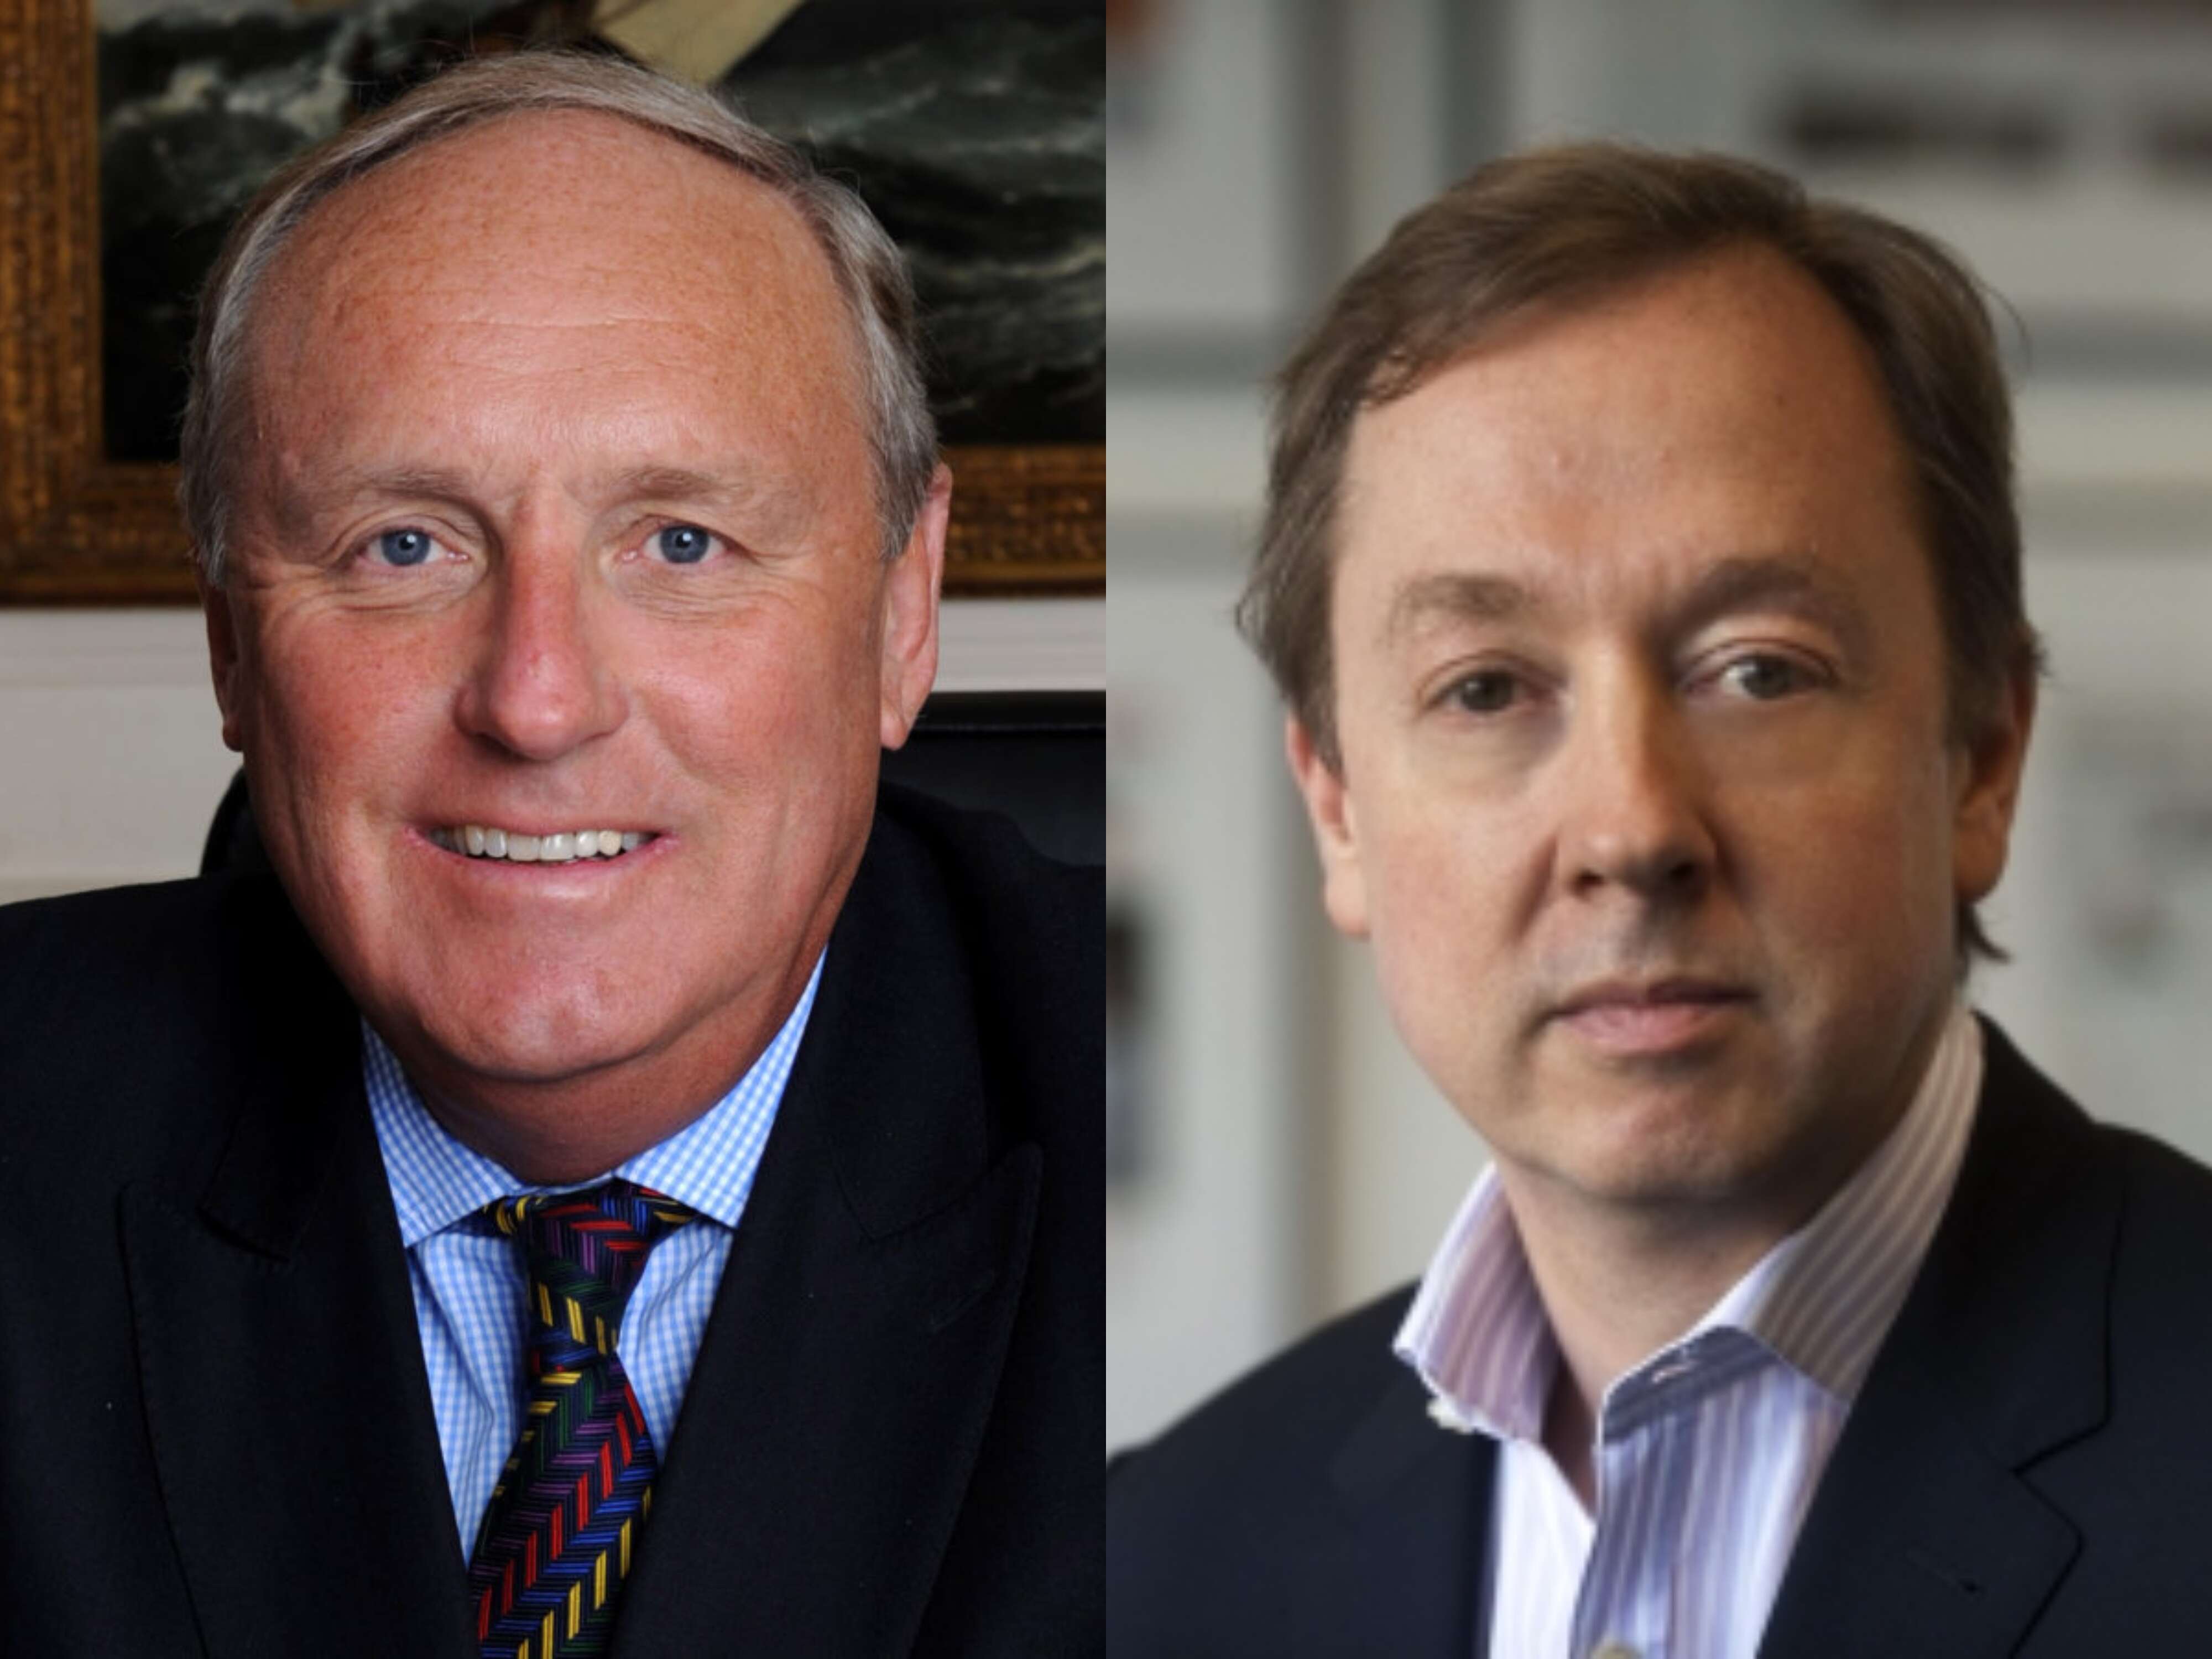 Paul Dacre issues stinging retort to Daily Mail successor Geordie Greig in FT letter